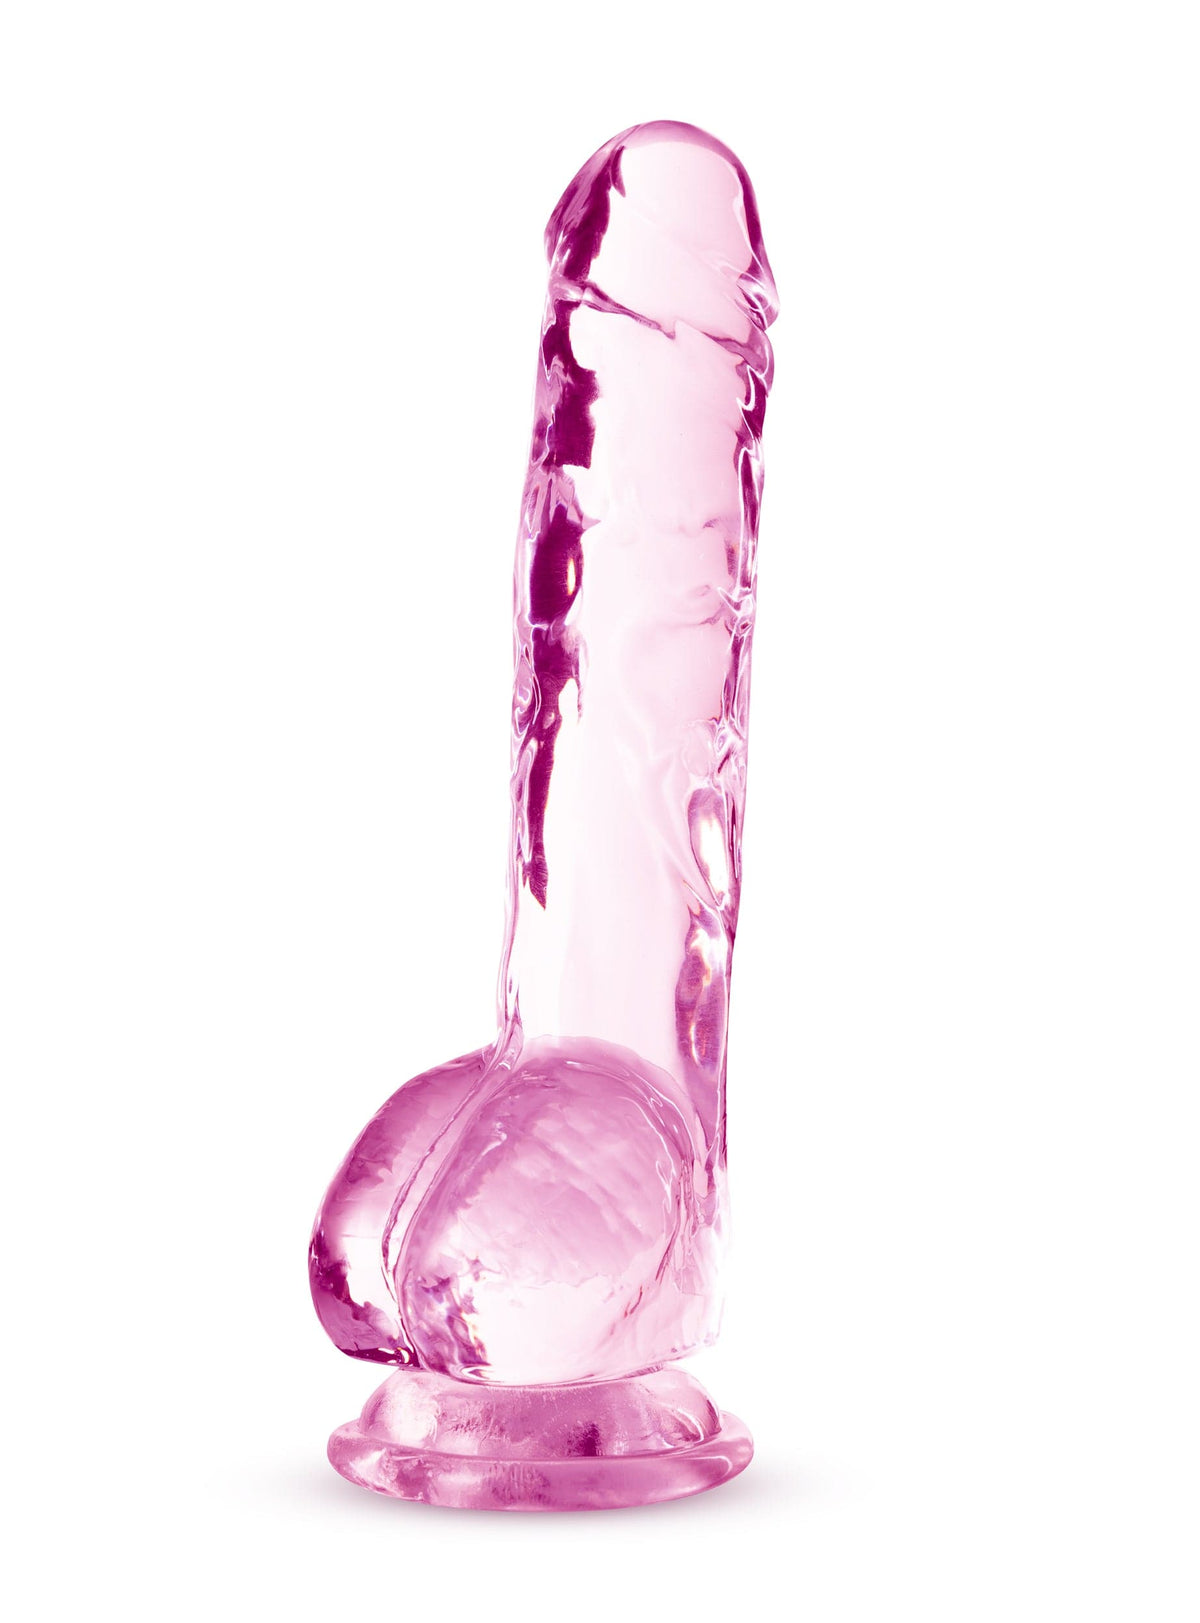 naturally yours 8 inch crystalline dildo rose